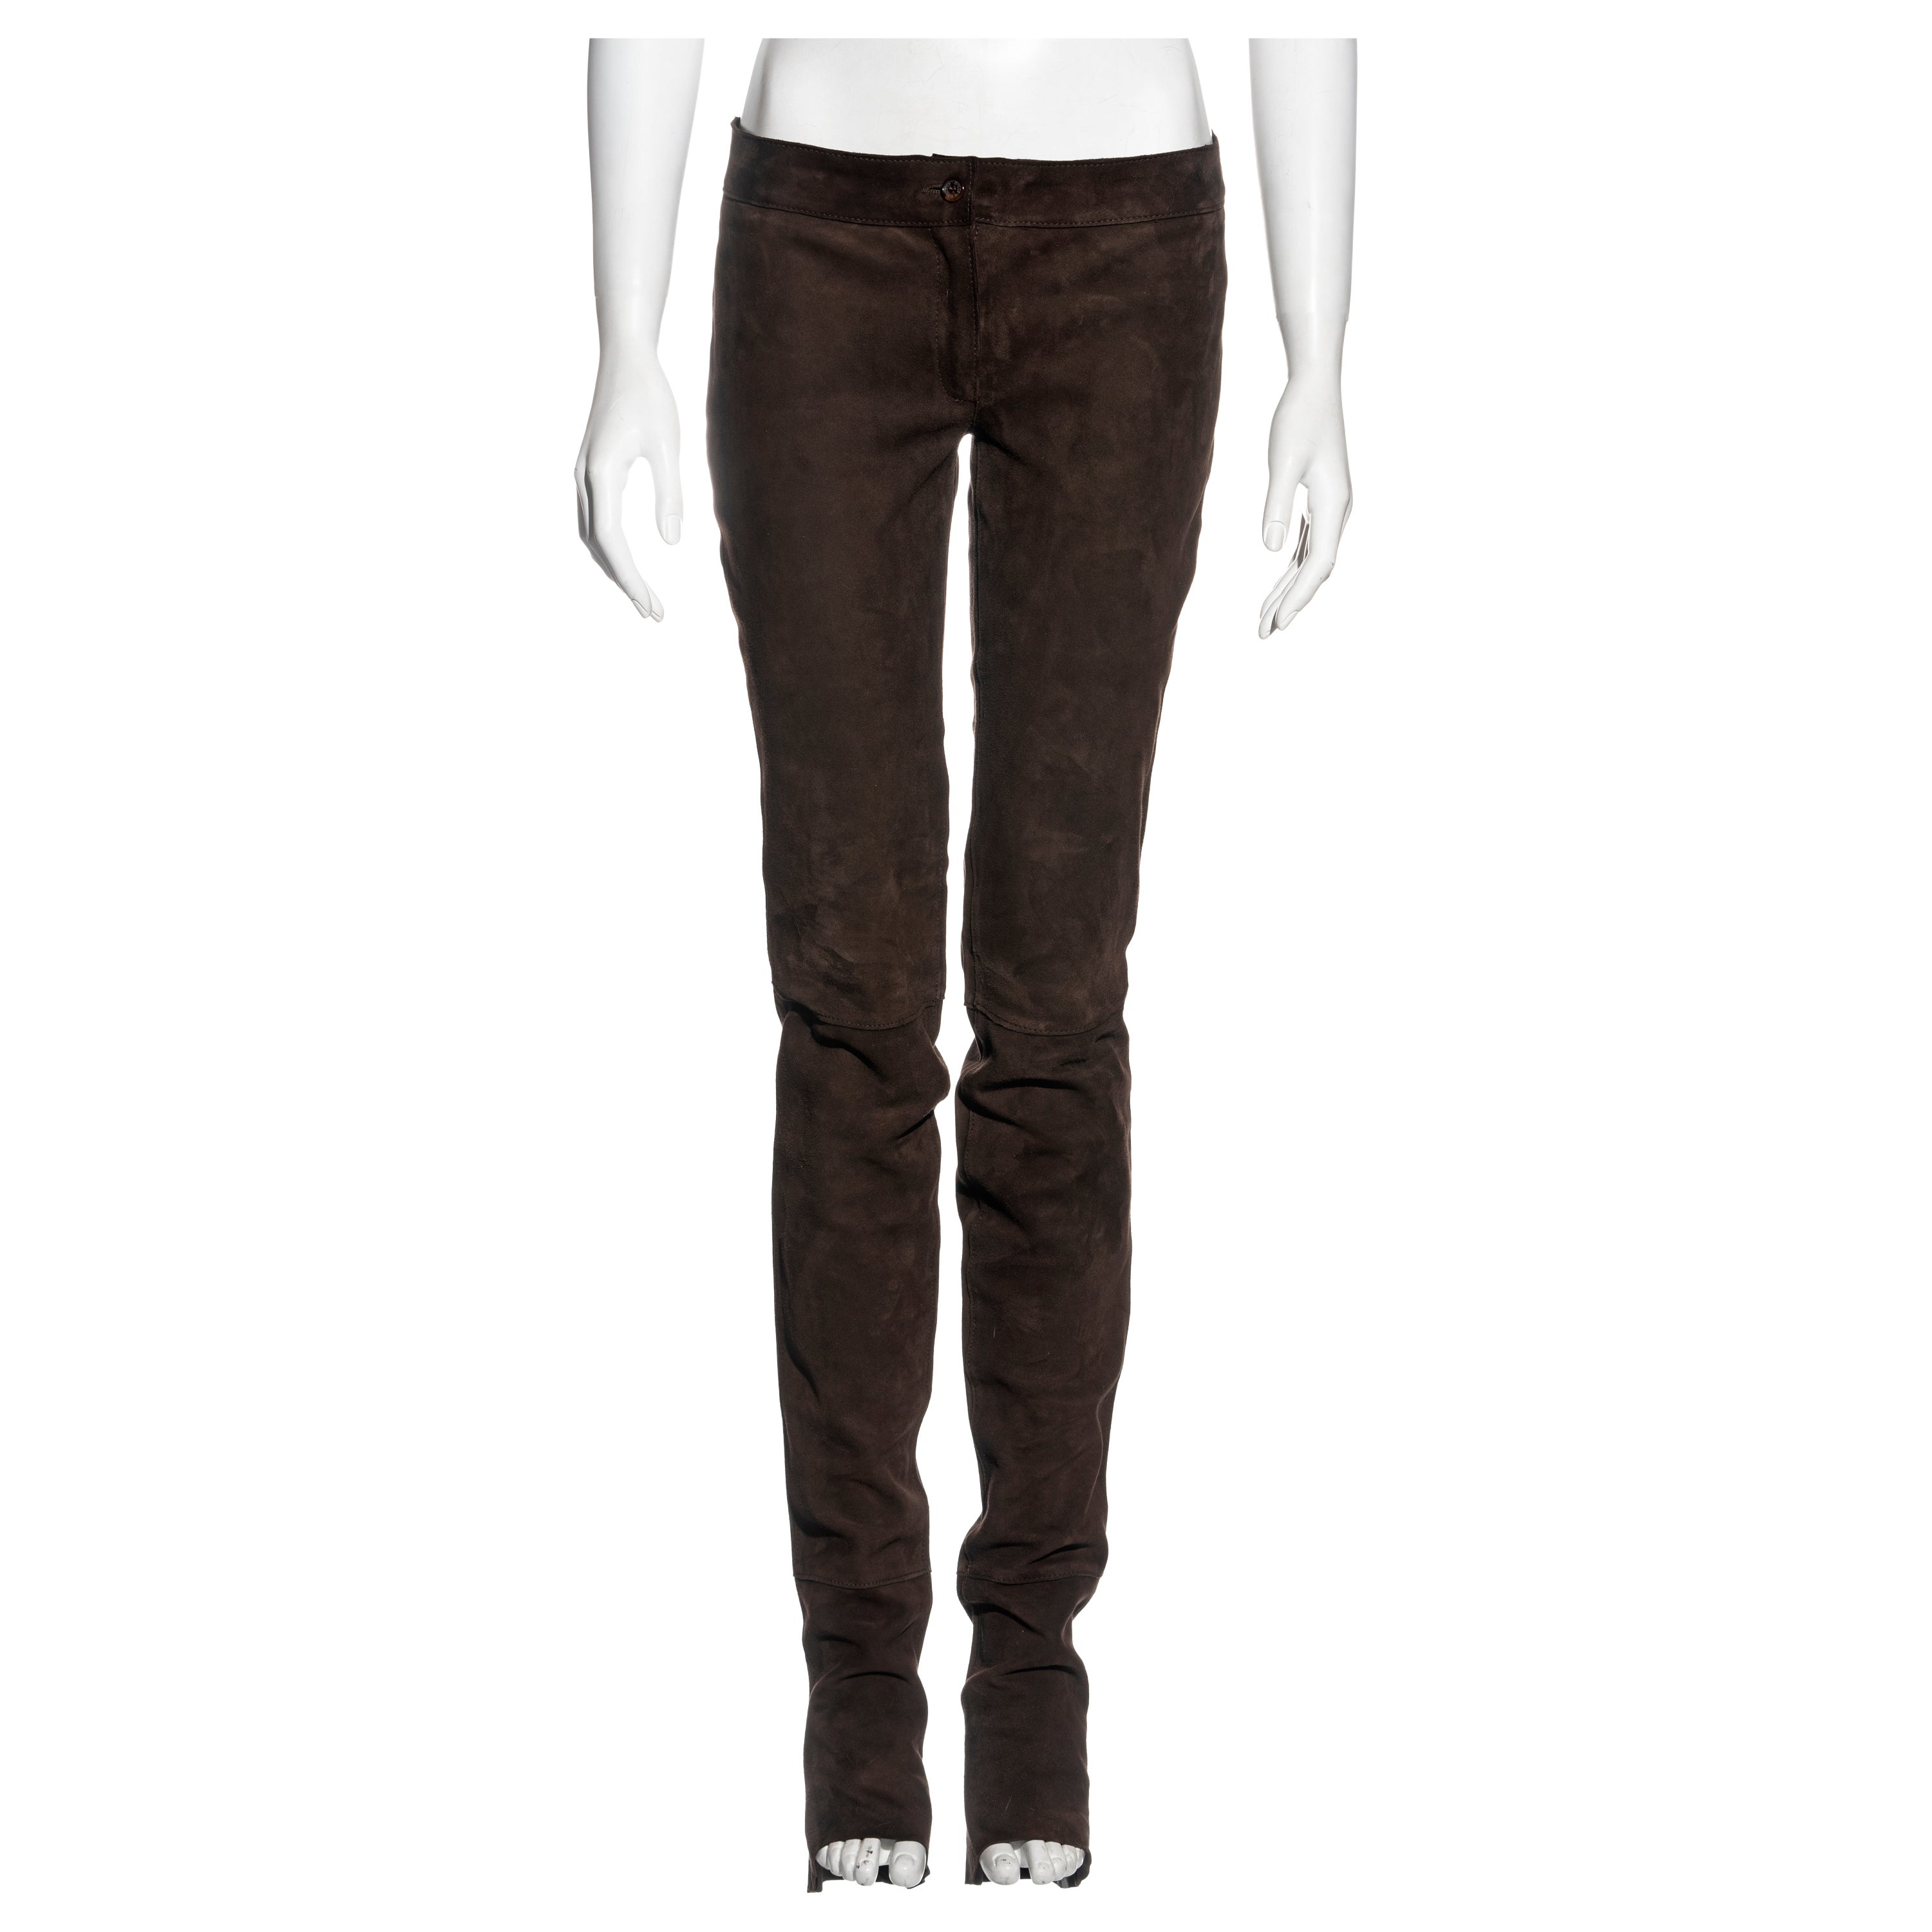 Dolce & Gabbana low rise extra long ruched brown leather pants, fw 2001